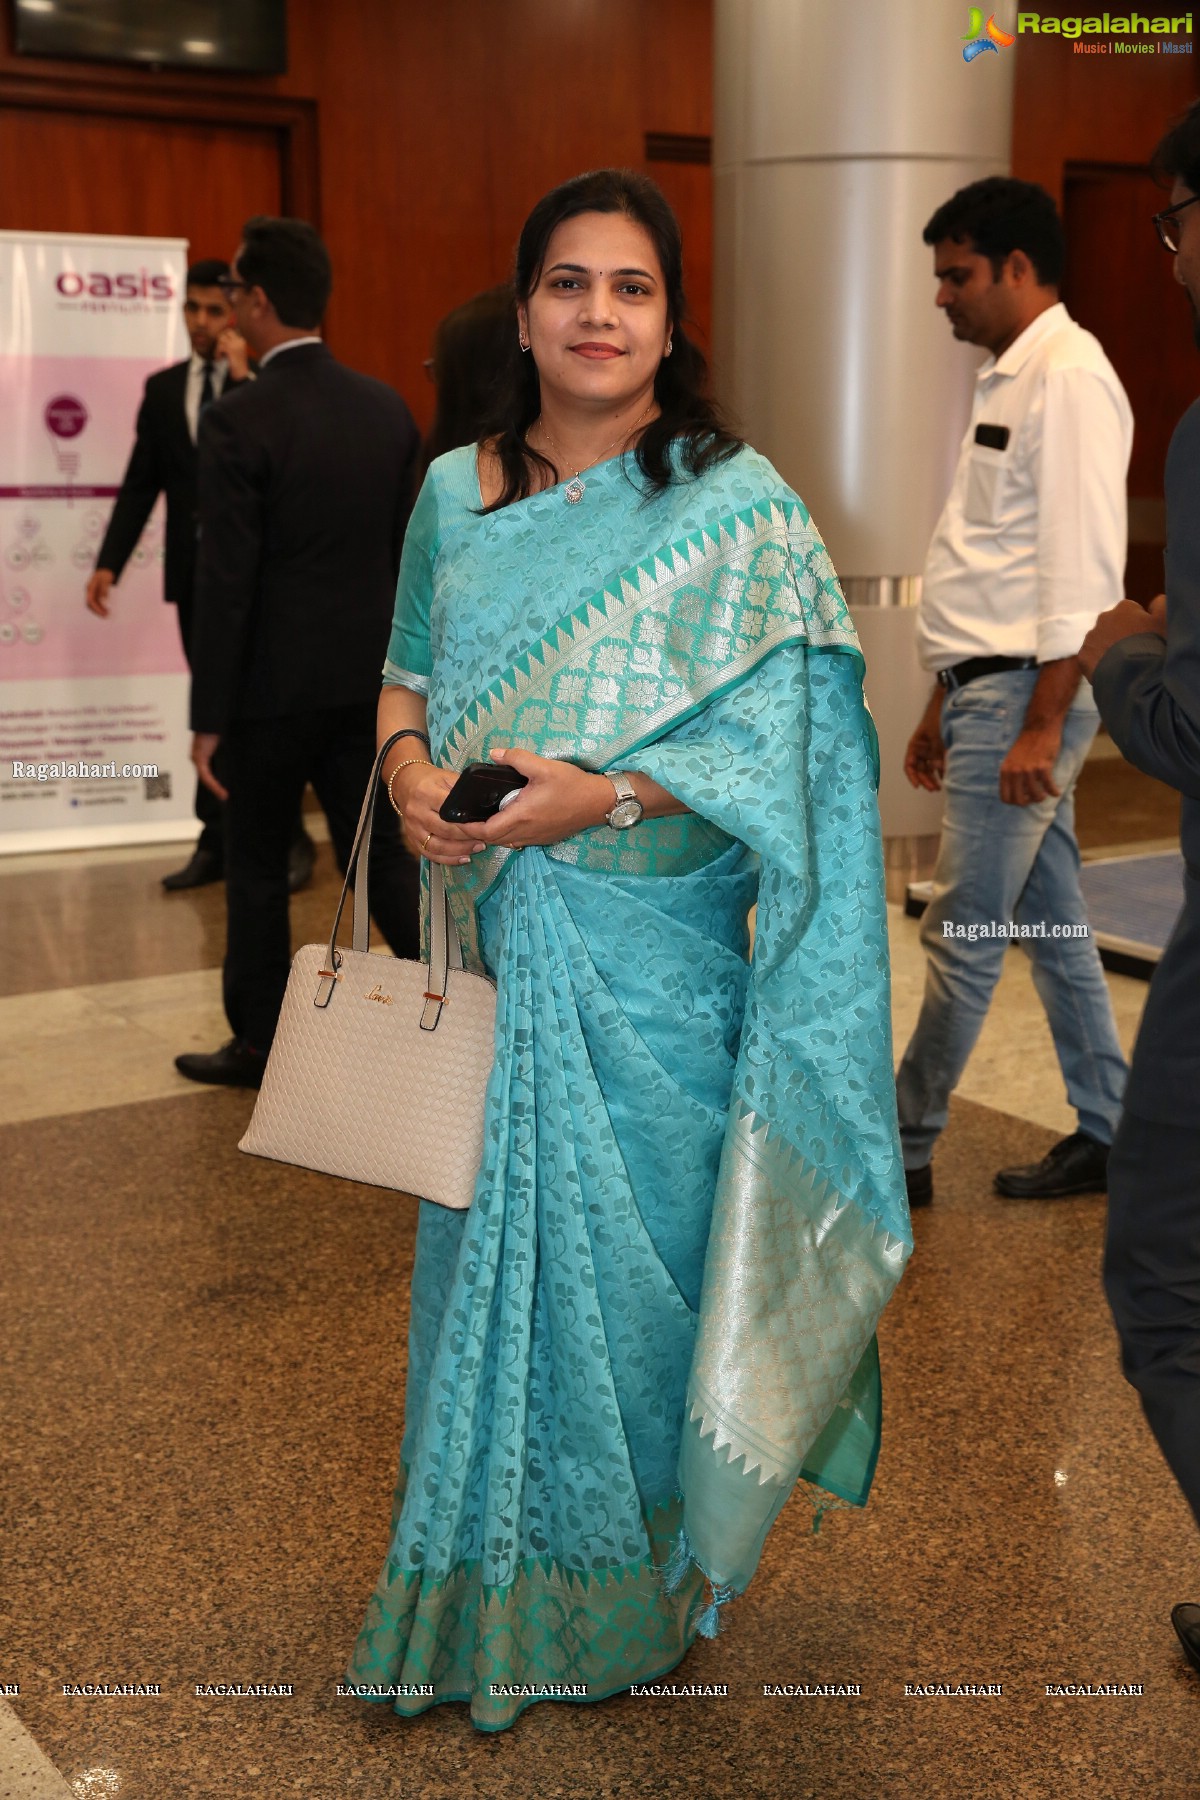 Fertility And Gynecology Conclave (South)